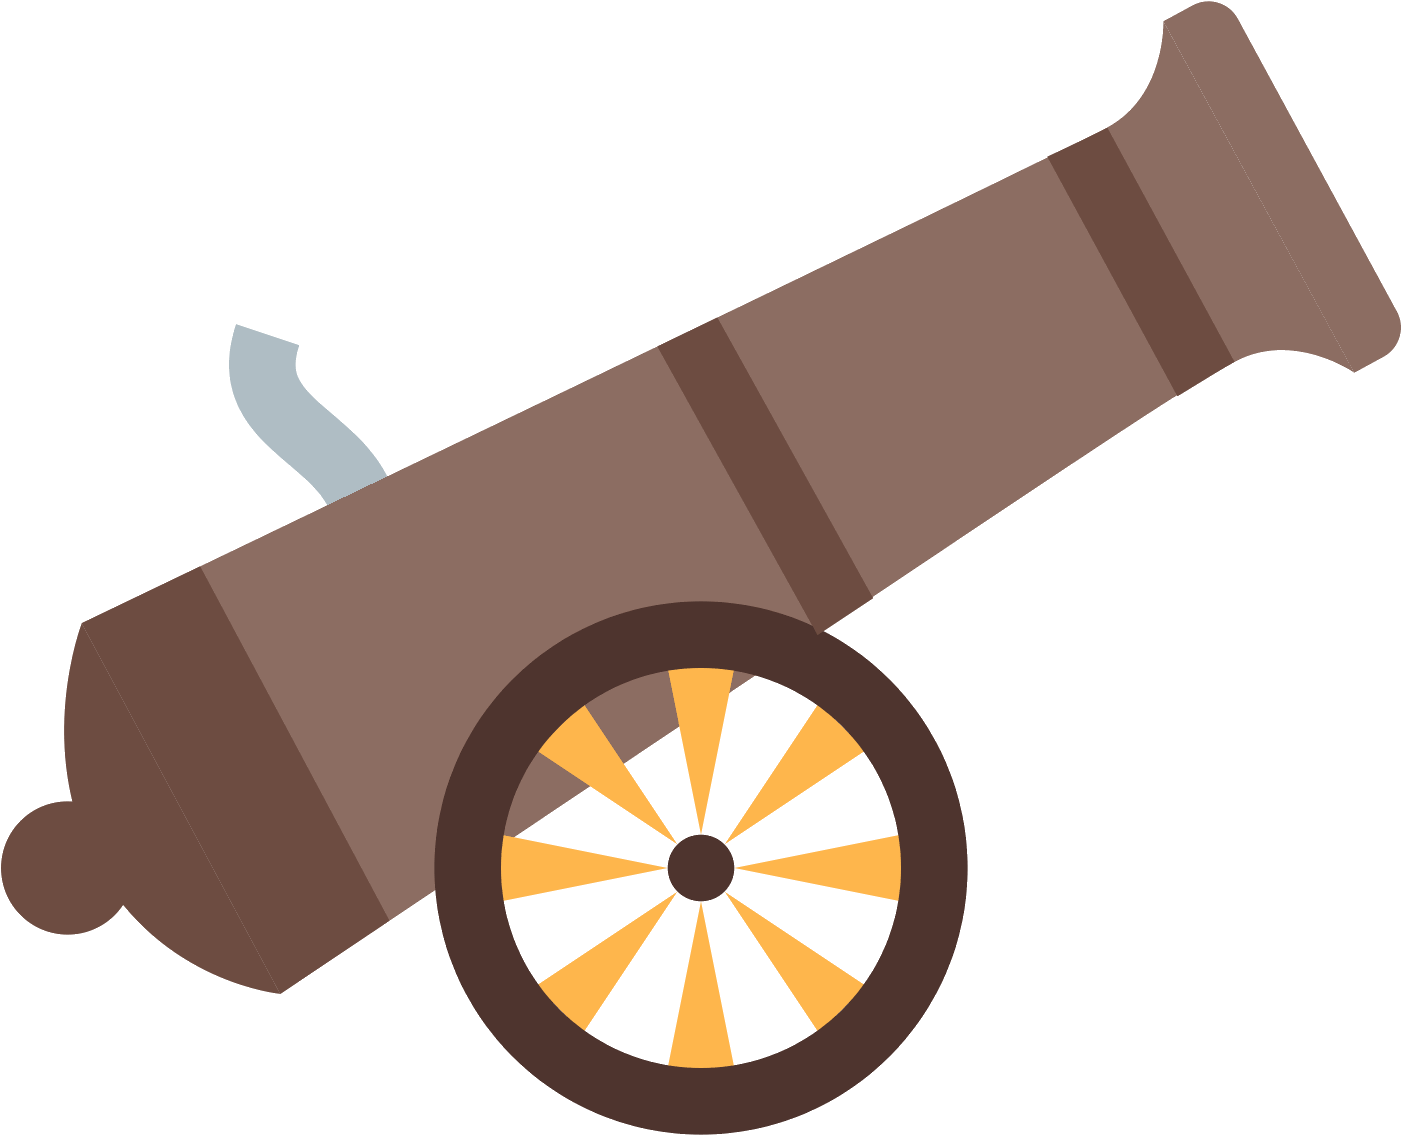 Cannon - Cannon Png (1600x1600)